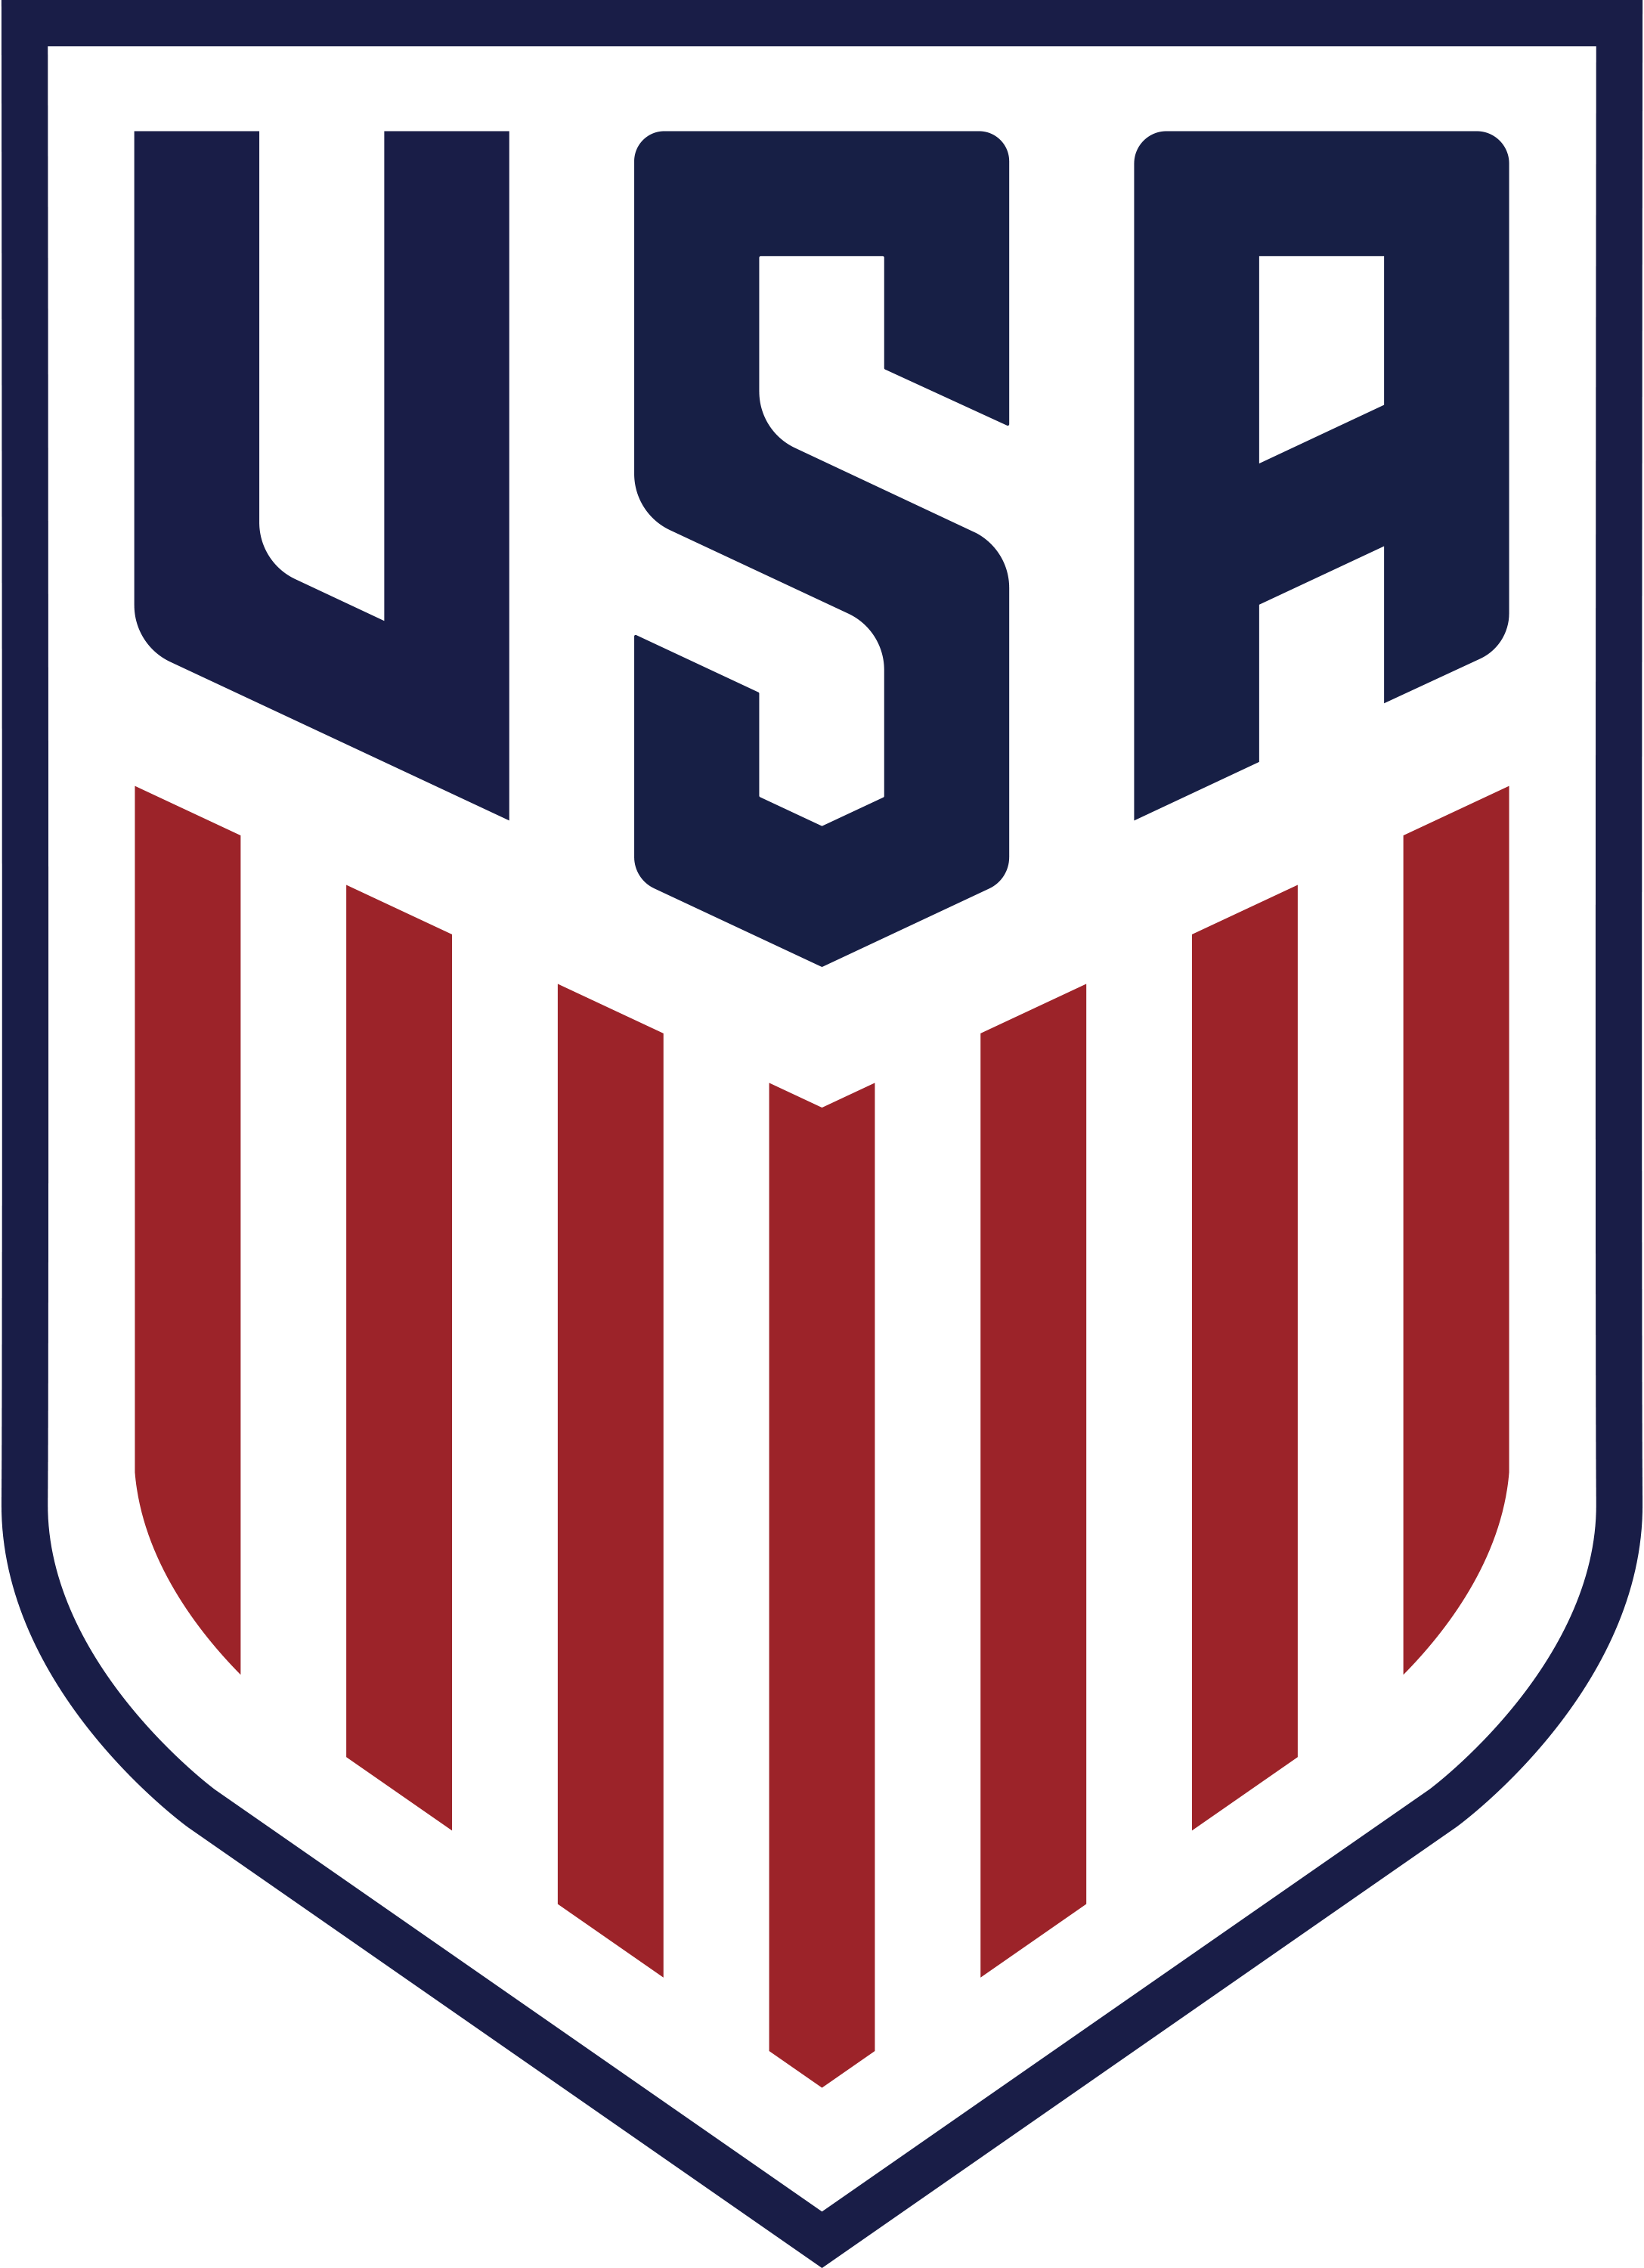 Tried to clean up the leaked 2016 crest